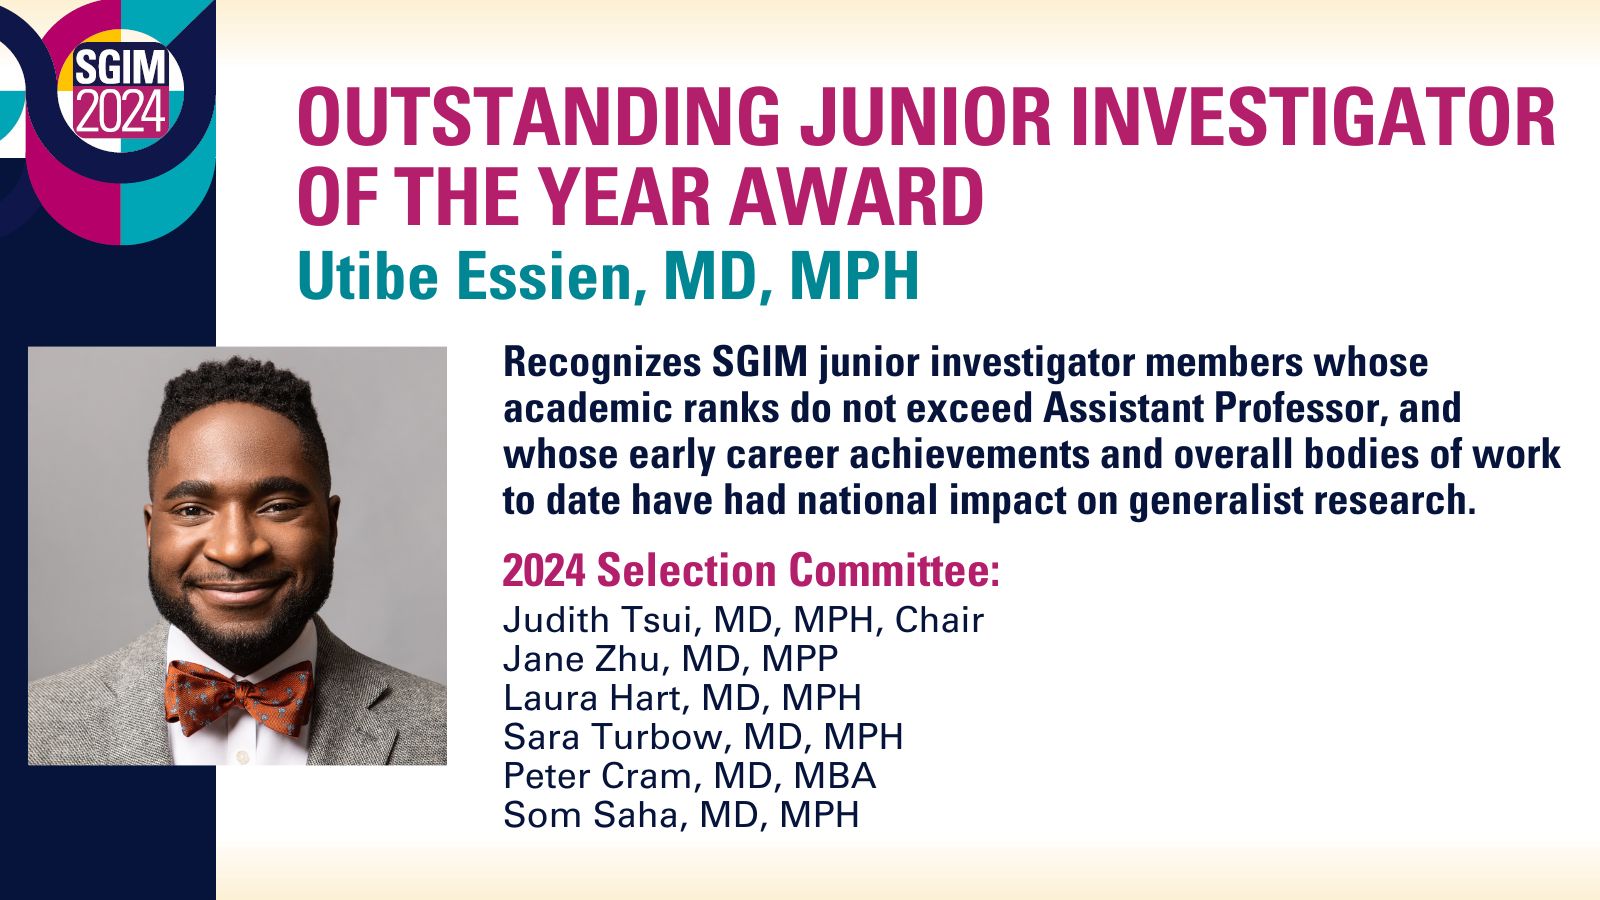 You are currently viewing Utibe Essien awarded 2024 Outstanding Junior Investigator of the Year Award by SGIM